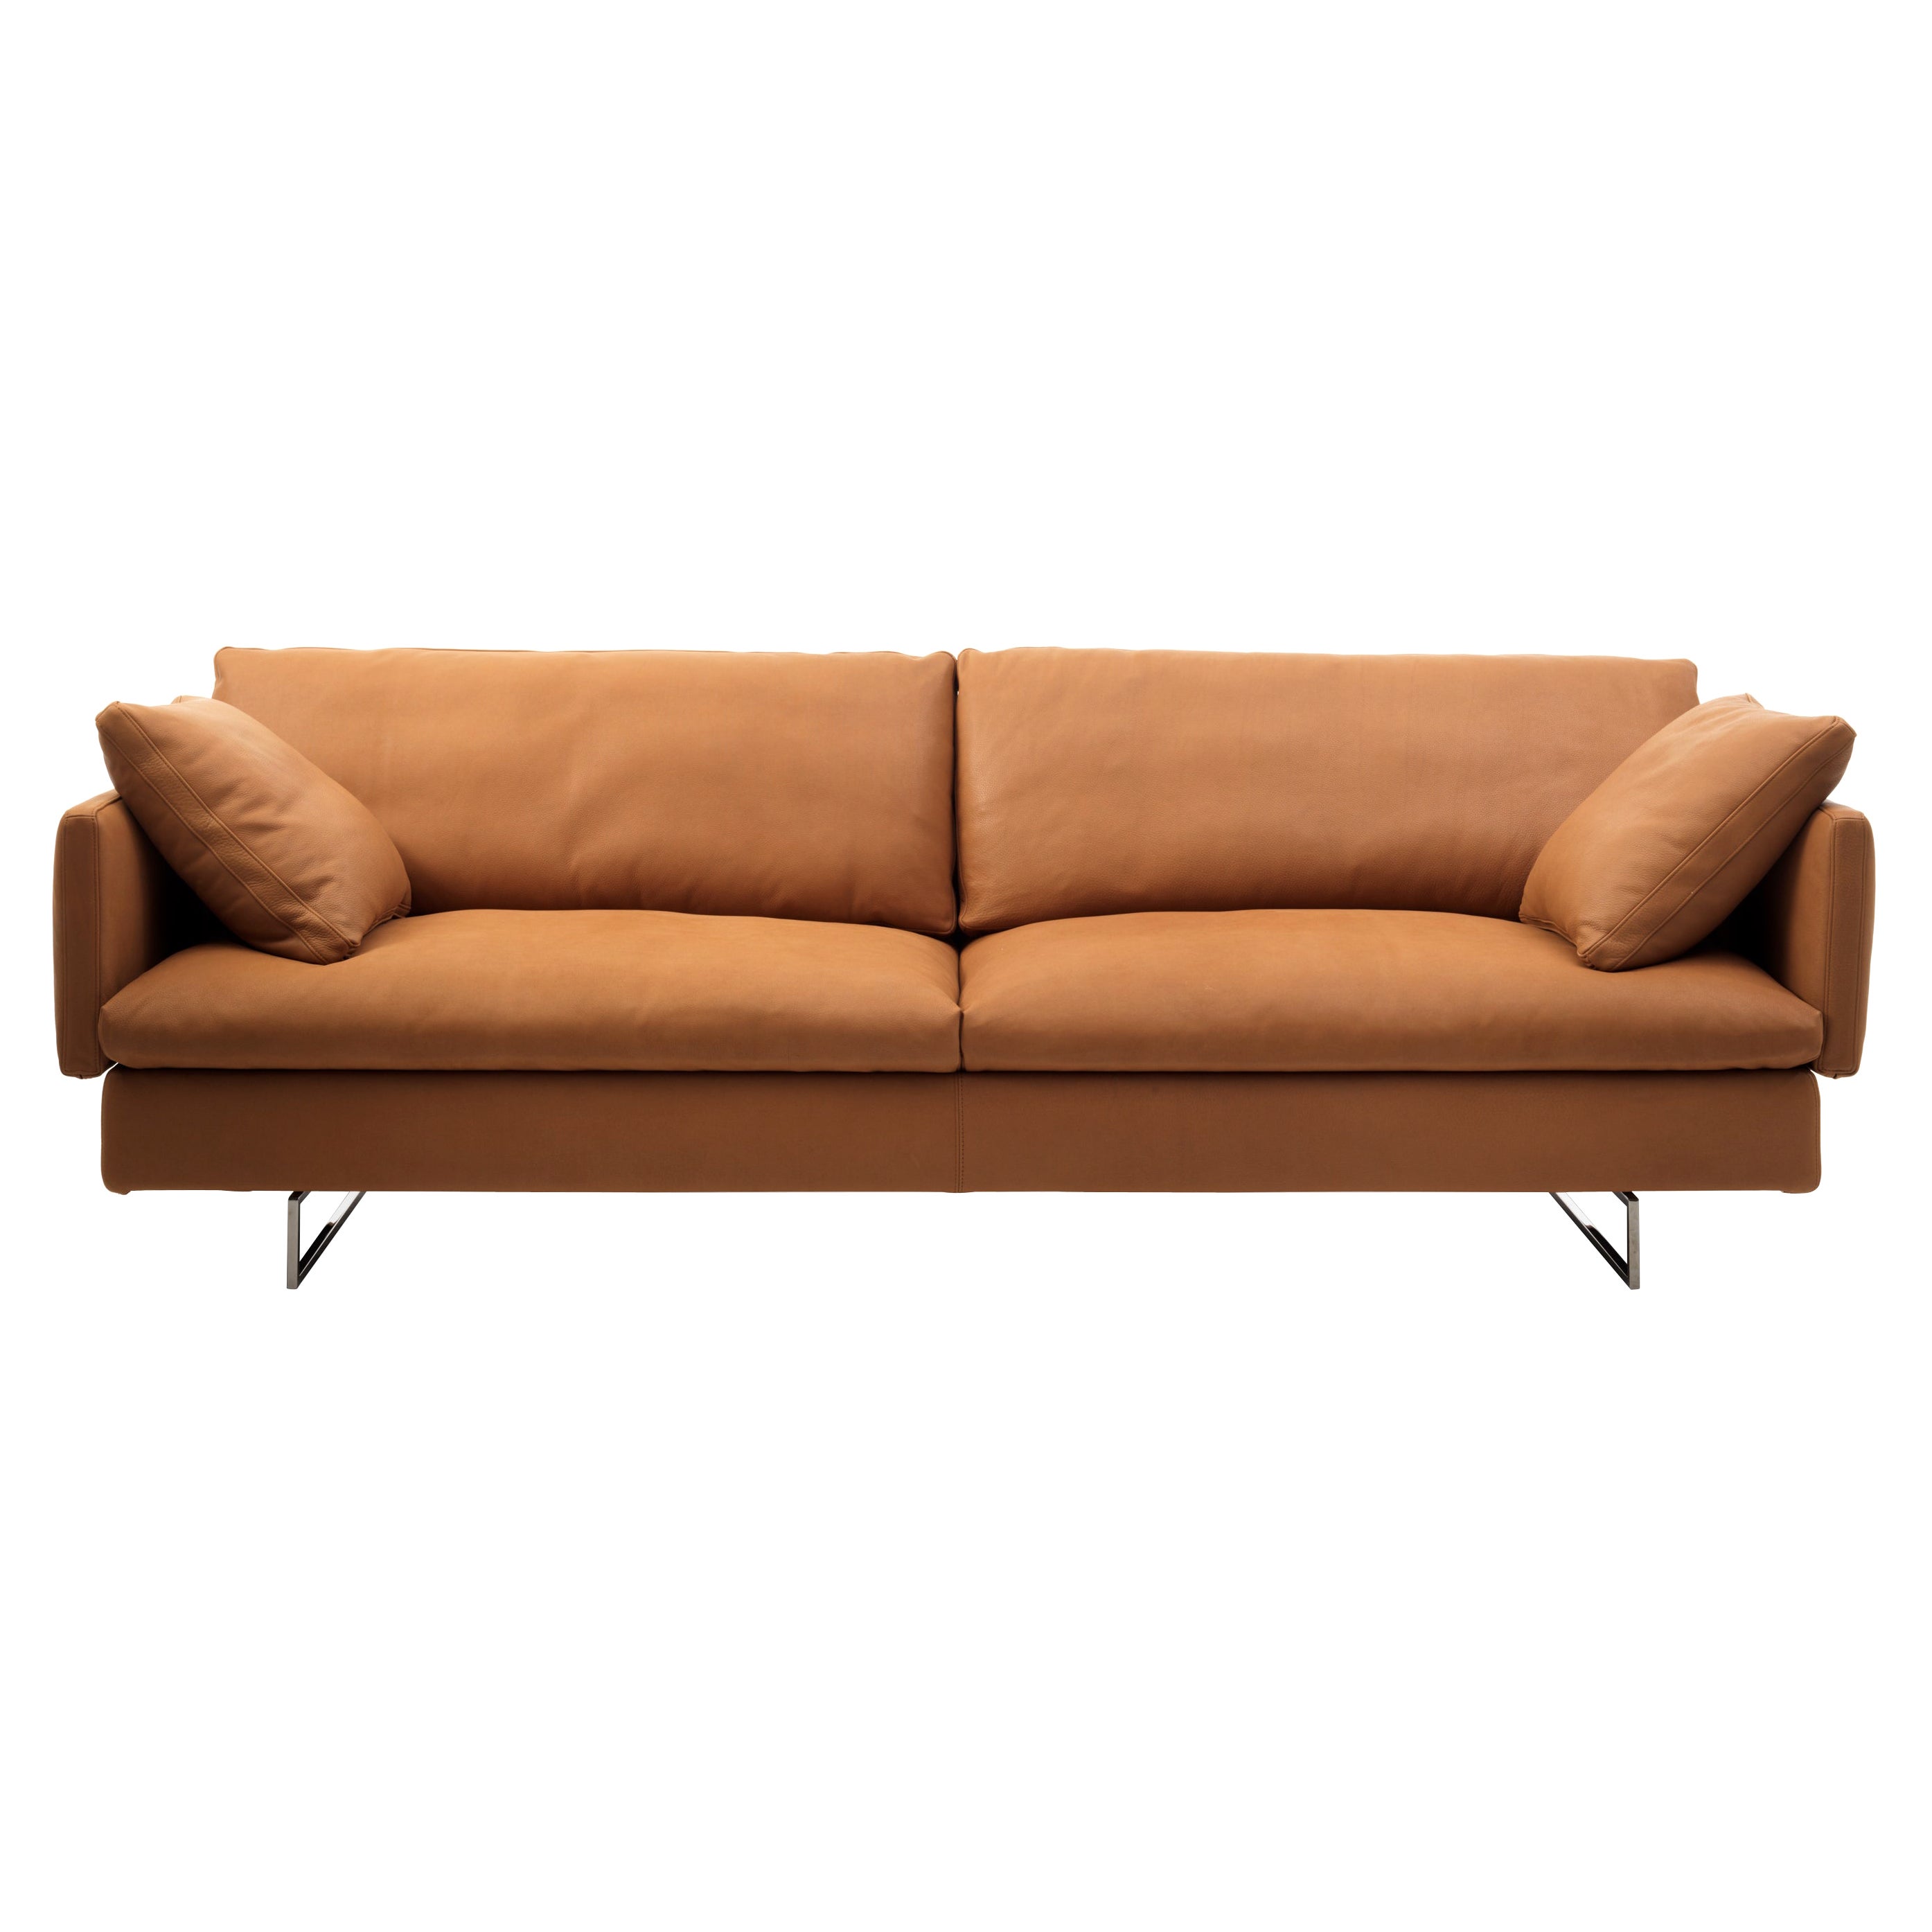 Voyage Large Sofa in Natural Leather Upholstery & Black Nickel by Sergio Bicego